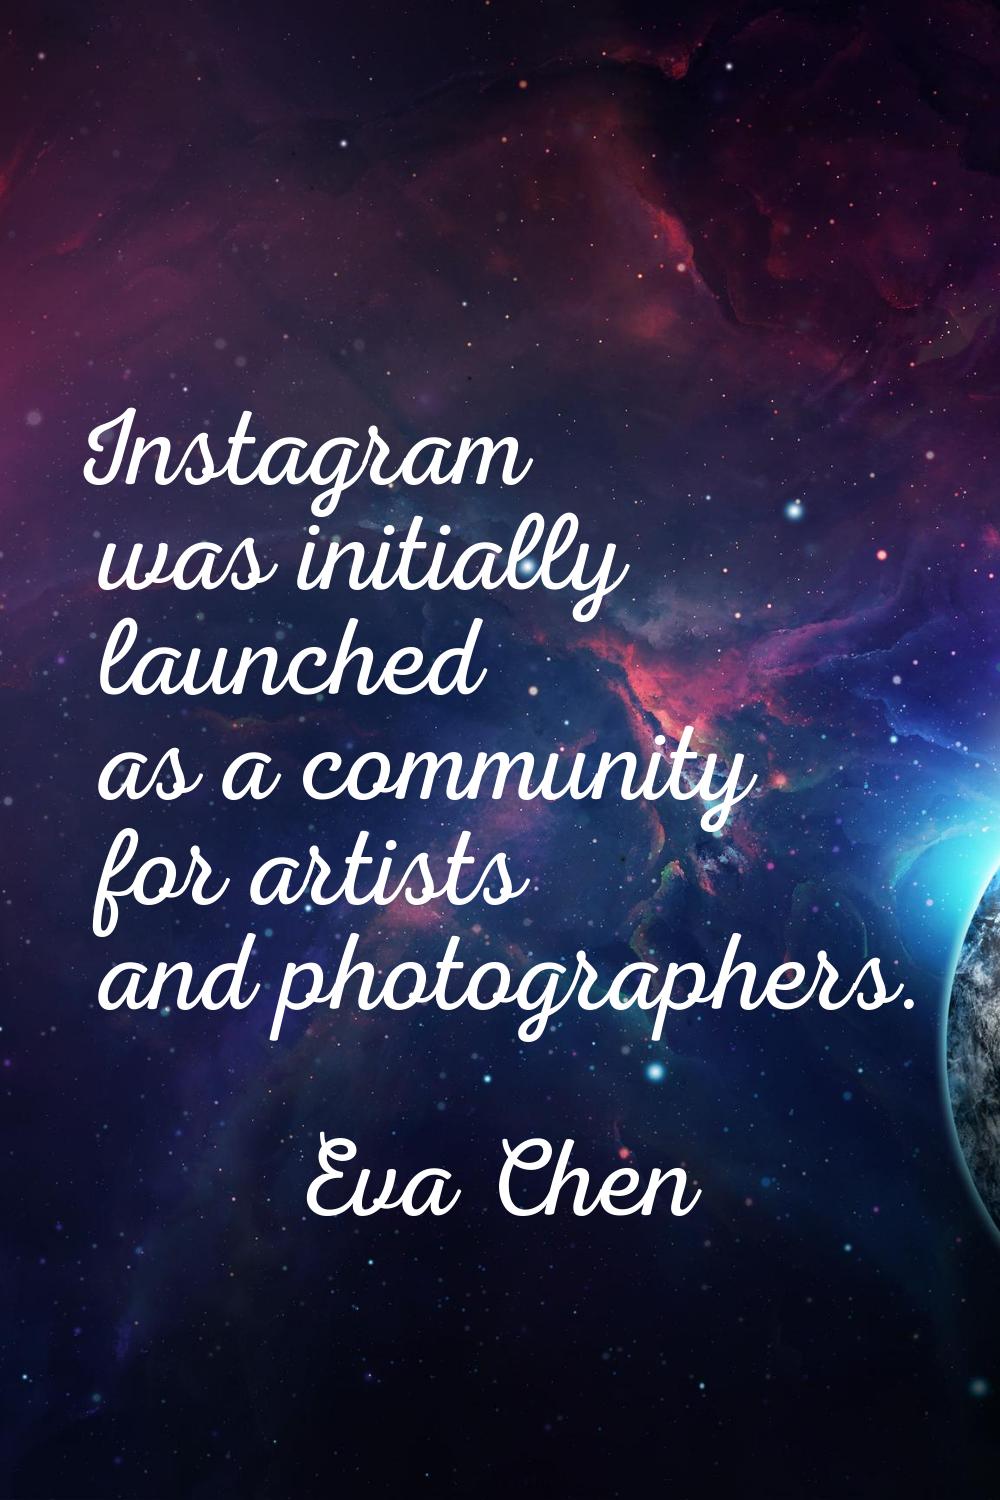 Instagram was initially launched as a community for artists and photographers.